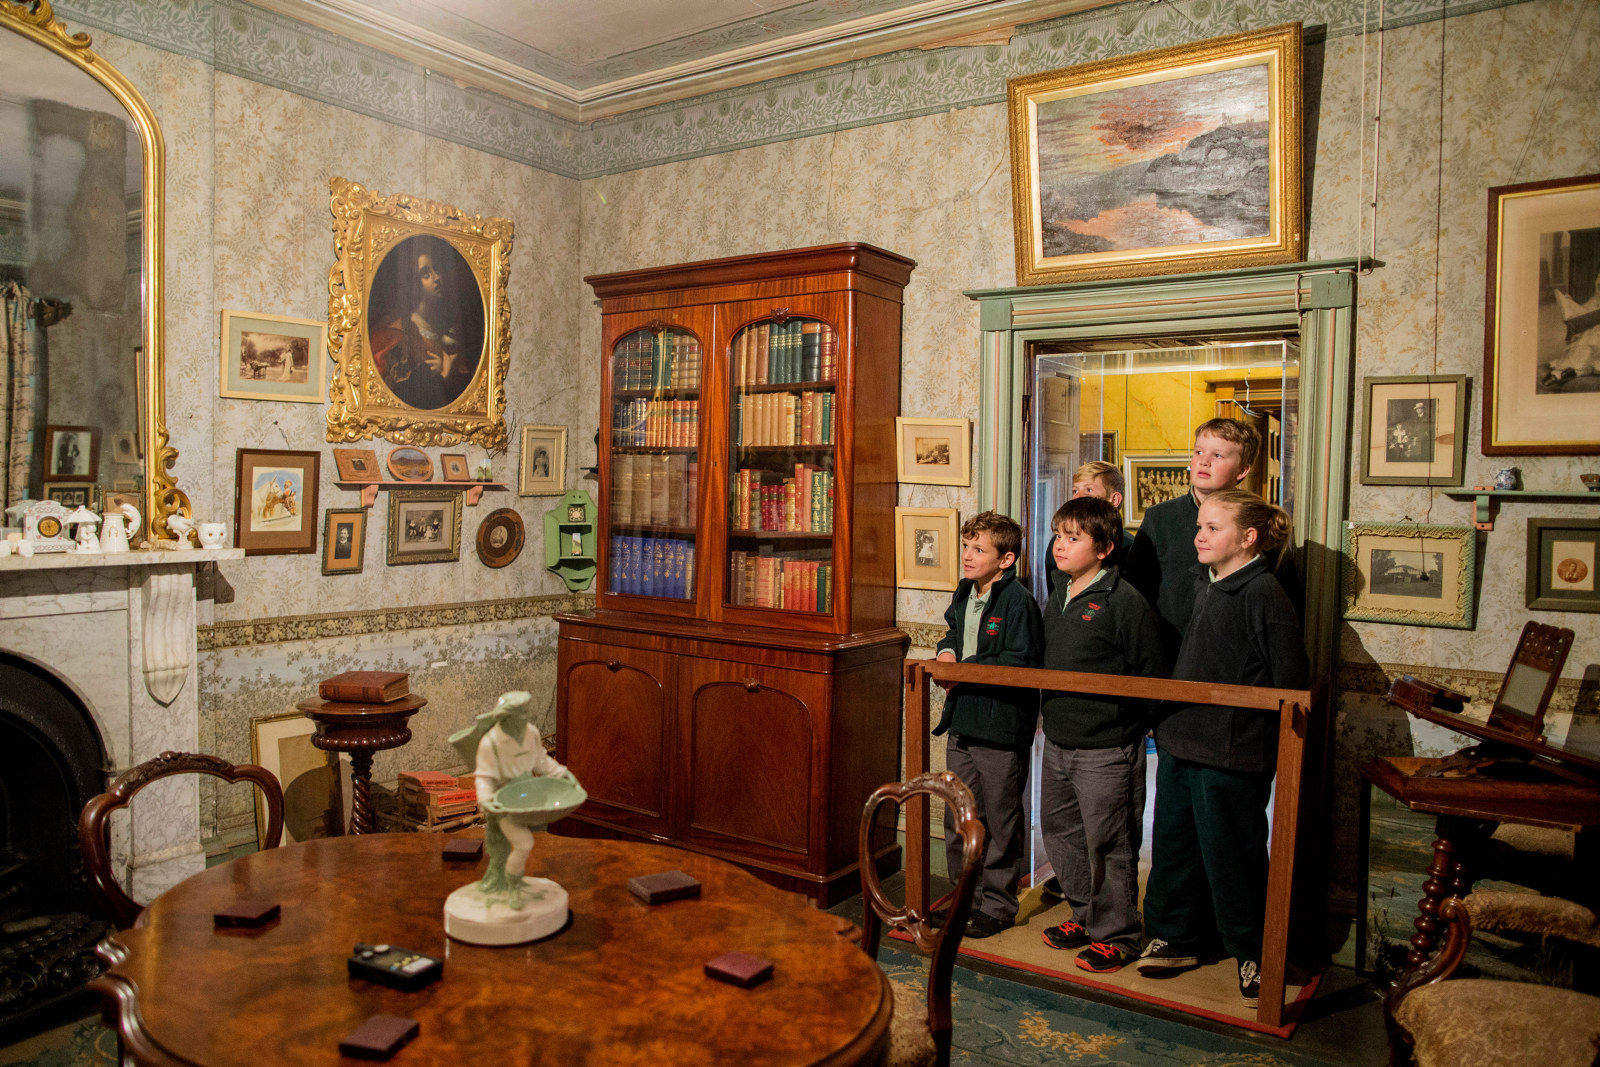 Students looking into the formal Sitting Room of Rouse Hill House during the program Expanding the Colony at Rouse Hill Estate